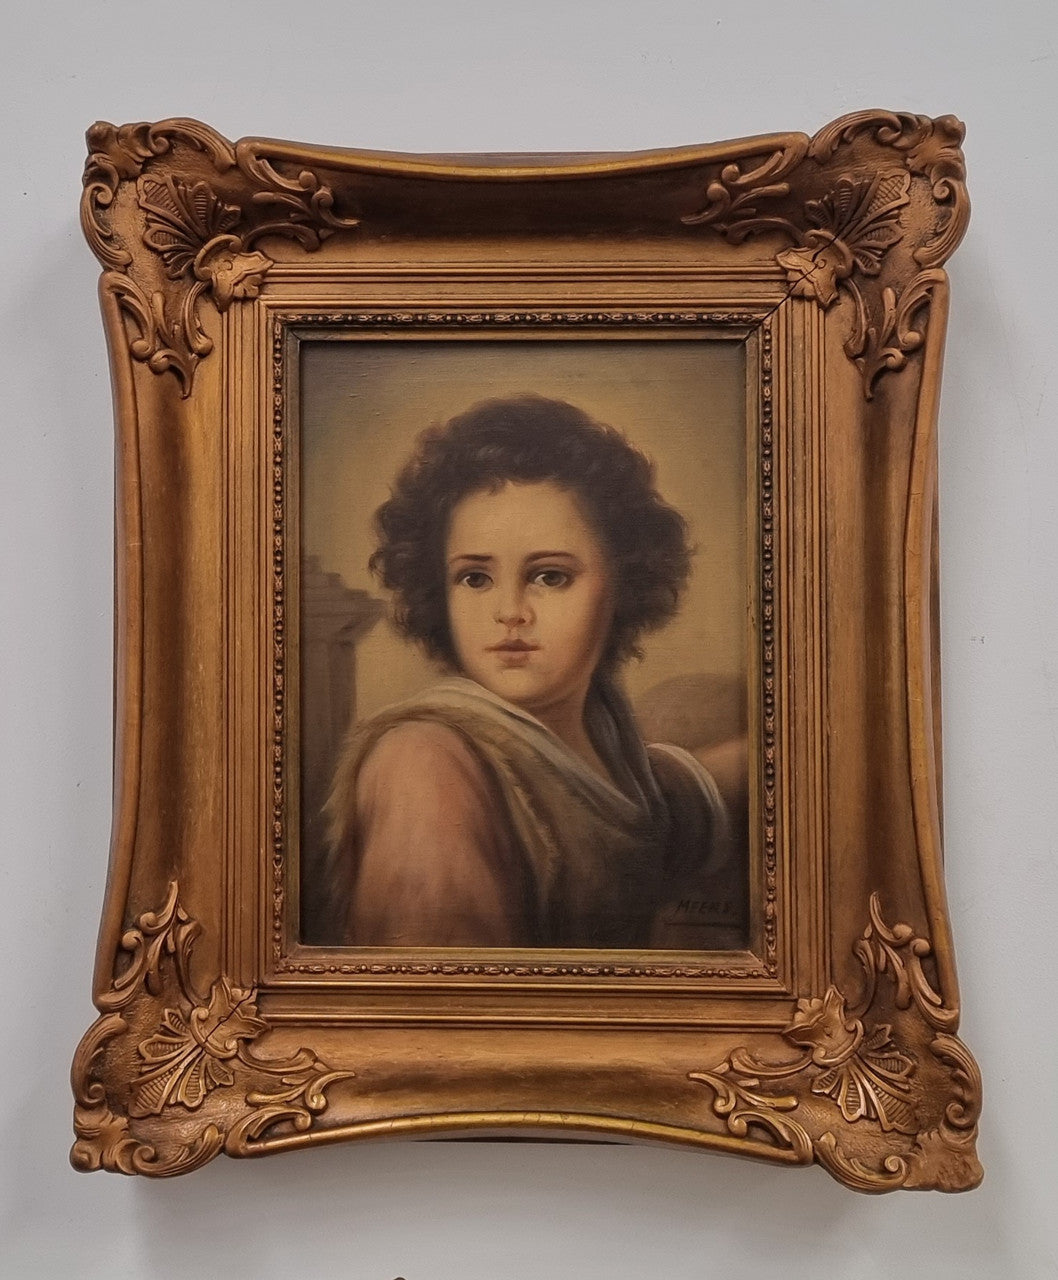 Attractive oil on canvas portrait of a young boy Signed “Meters” in an ornate gilt frame. In good original detailed condition.